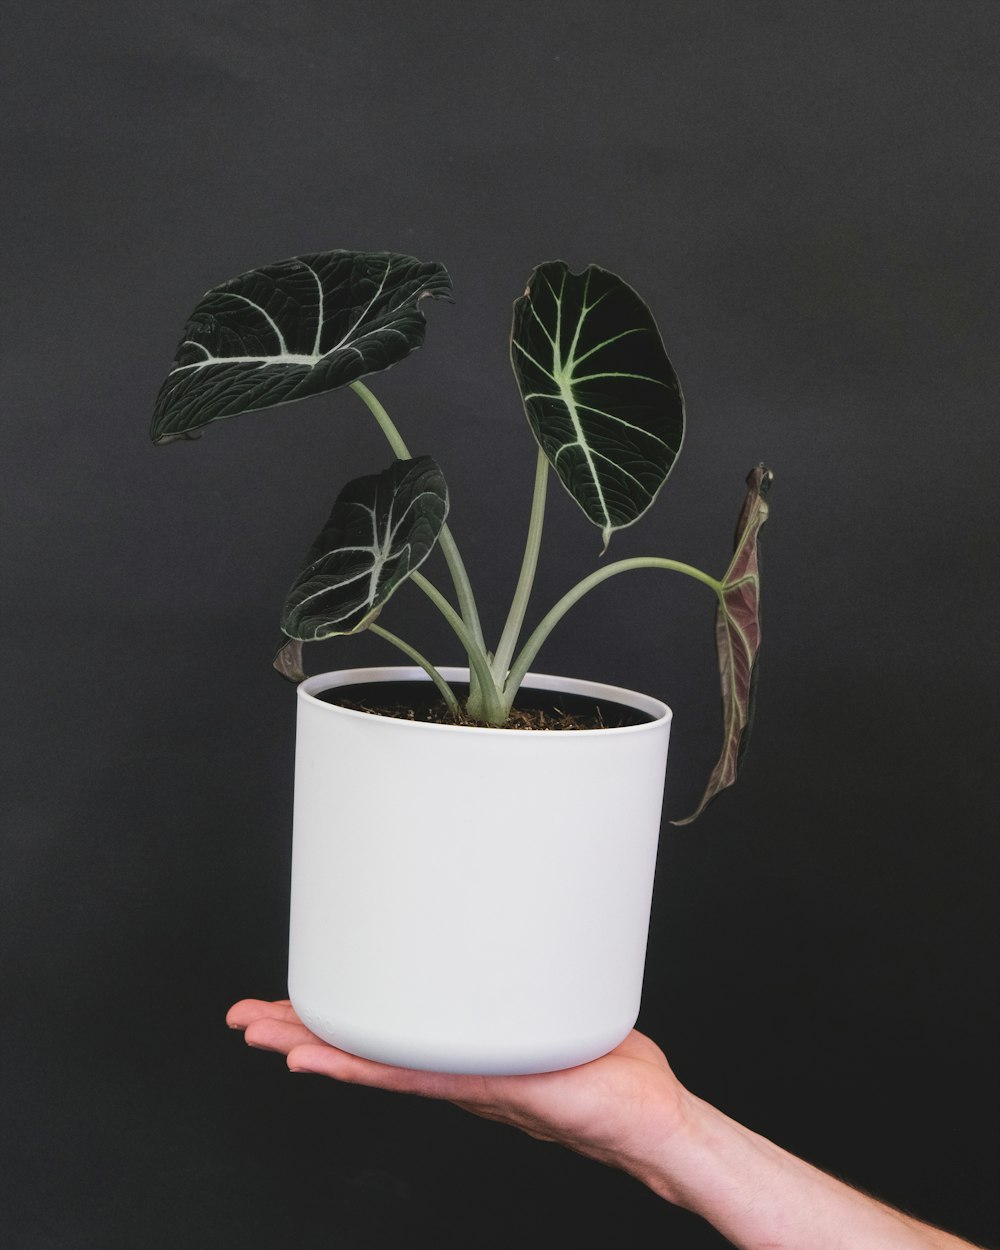 a hand holding a potted plant with green leaves